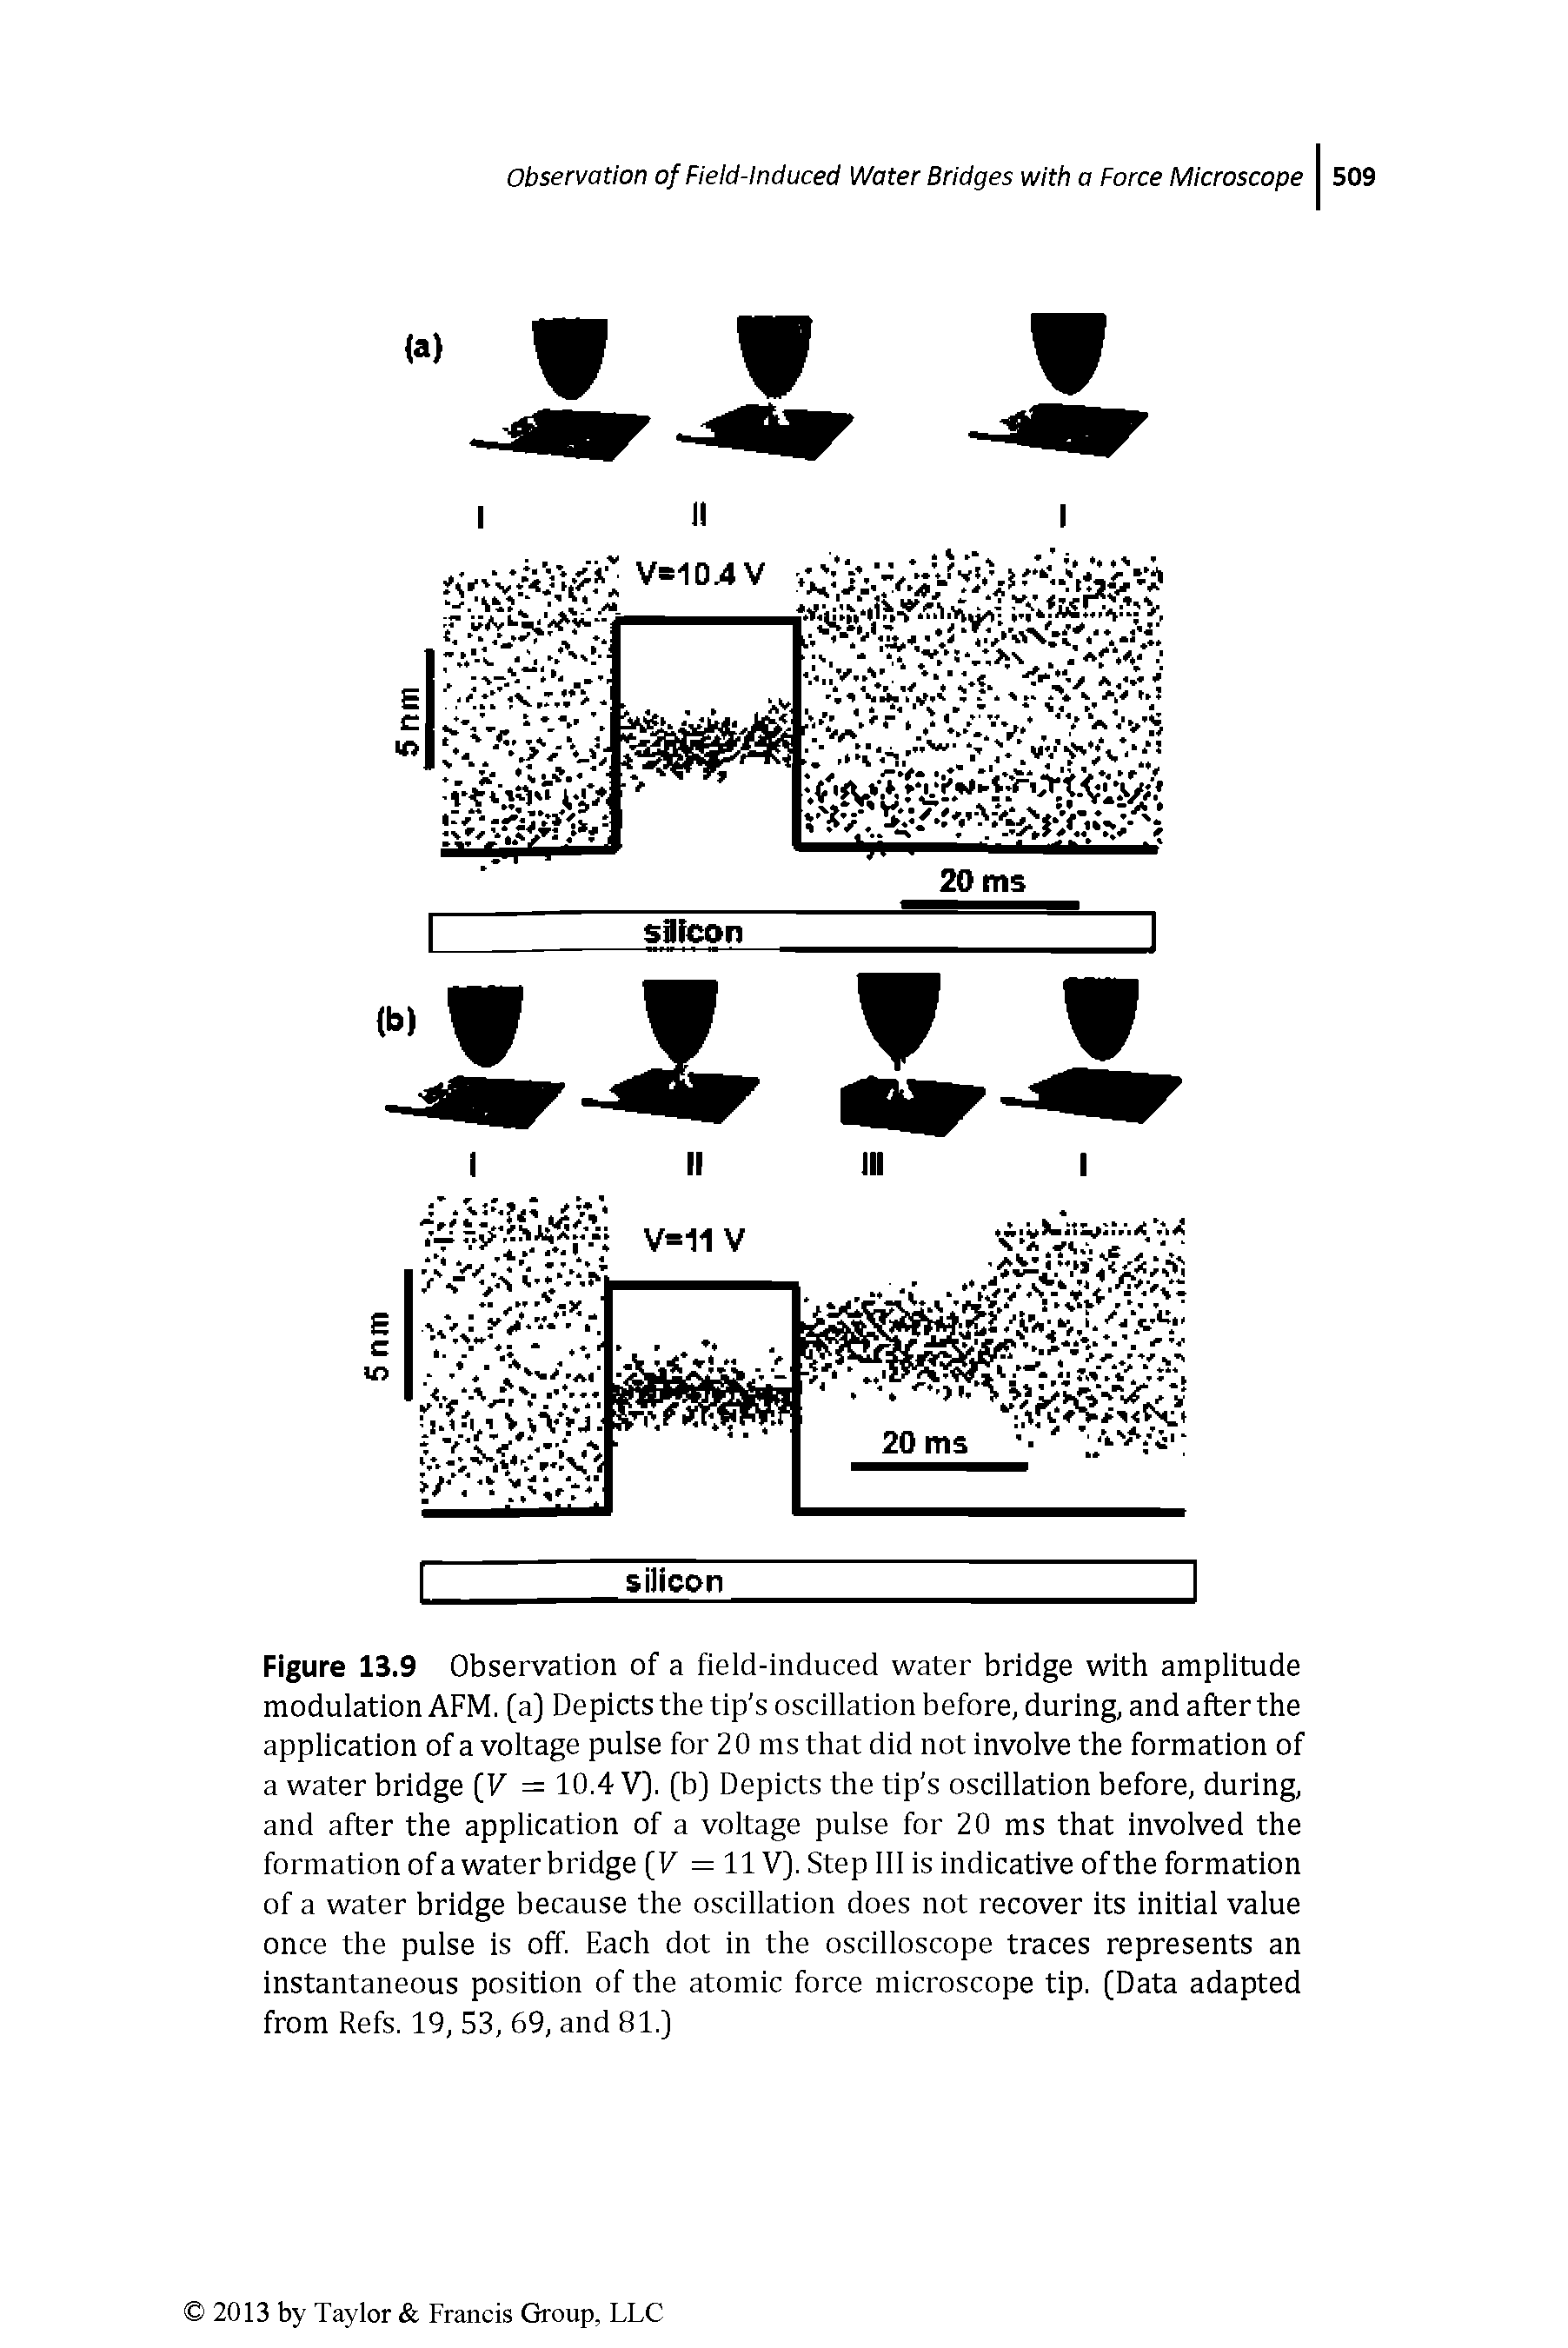 Figure 13.9 Observation of a field-induced water bridge with amplitude modulation AFM. [a] Depicts the tip s oscillation before, during, and after the application of a voltage pulse for 20 ms that did not involve the formation of a water bridge [V = 10.4 V], [b] Depicts the tip s oscillation before, during, and after the application of a voltage pulse for 20 ms that involved the formation ofa water bridge [V = 11V], Step ill is indicative of the formation of a water bridge because the oscillation does not recover its initial value once the pulse is off. Each dot in the oscilloscope traces represents an instantaneous position of the atomic force microscope tip. [Data adapted from Refs. 19, 53, 69, and 81.]...